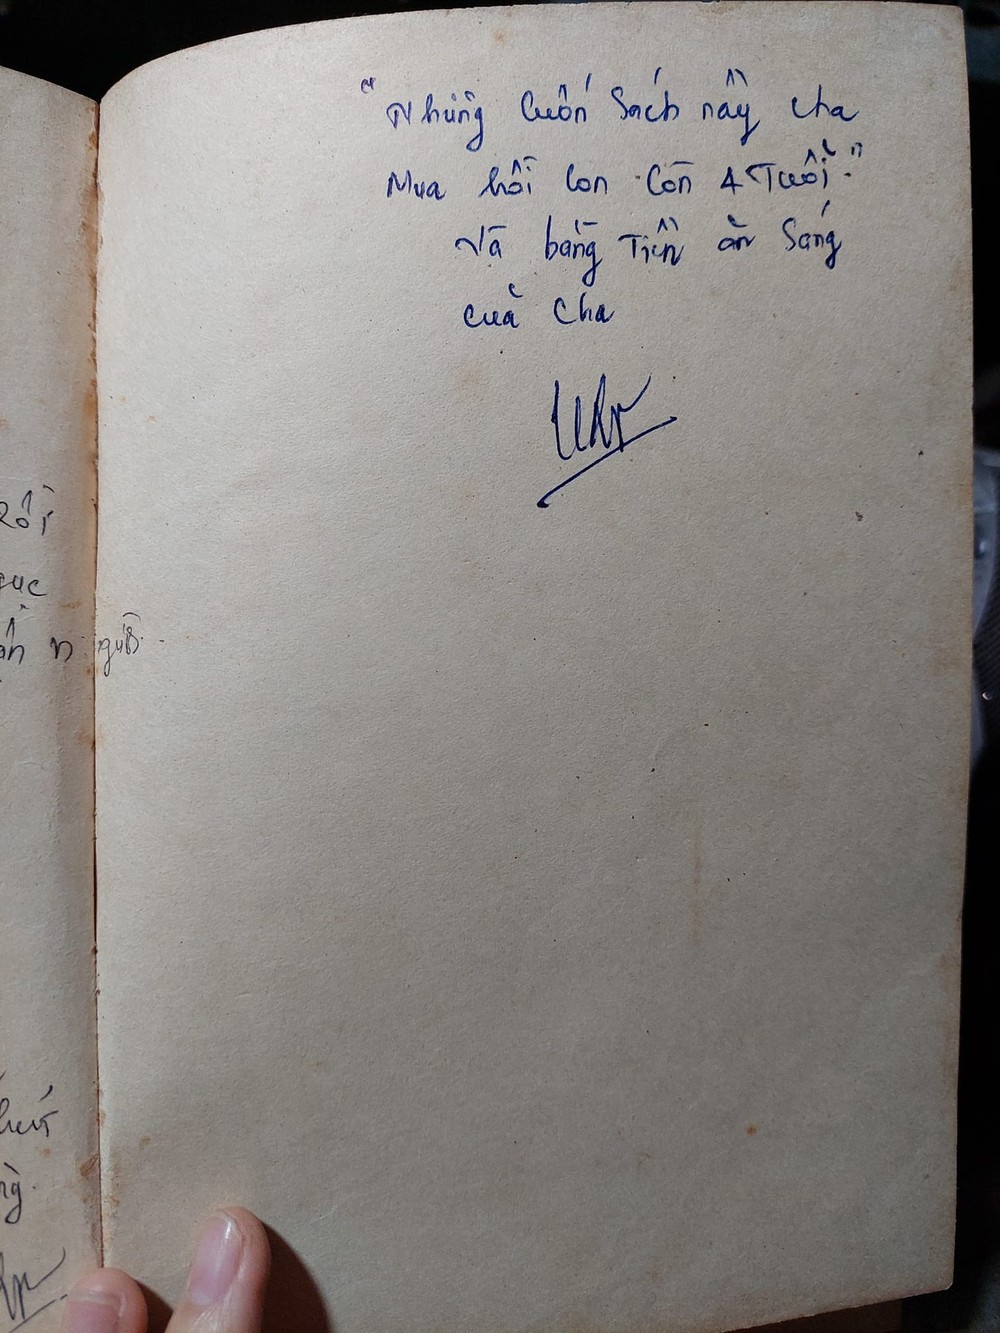 The book was found in the thrift store, the father's words moved people - Photo 2.